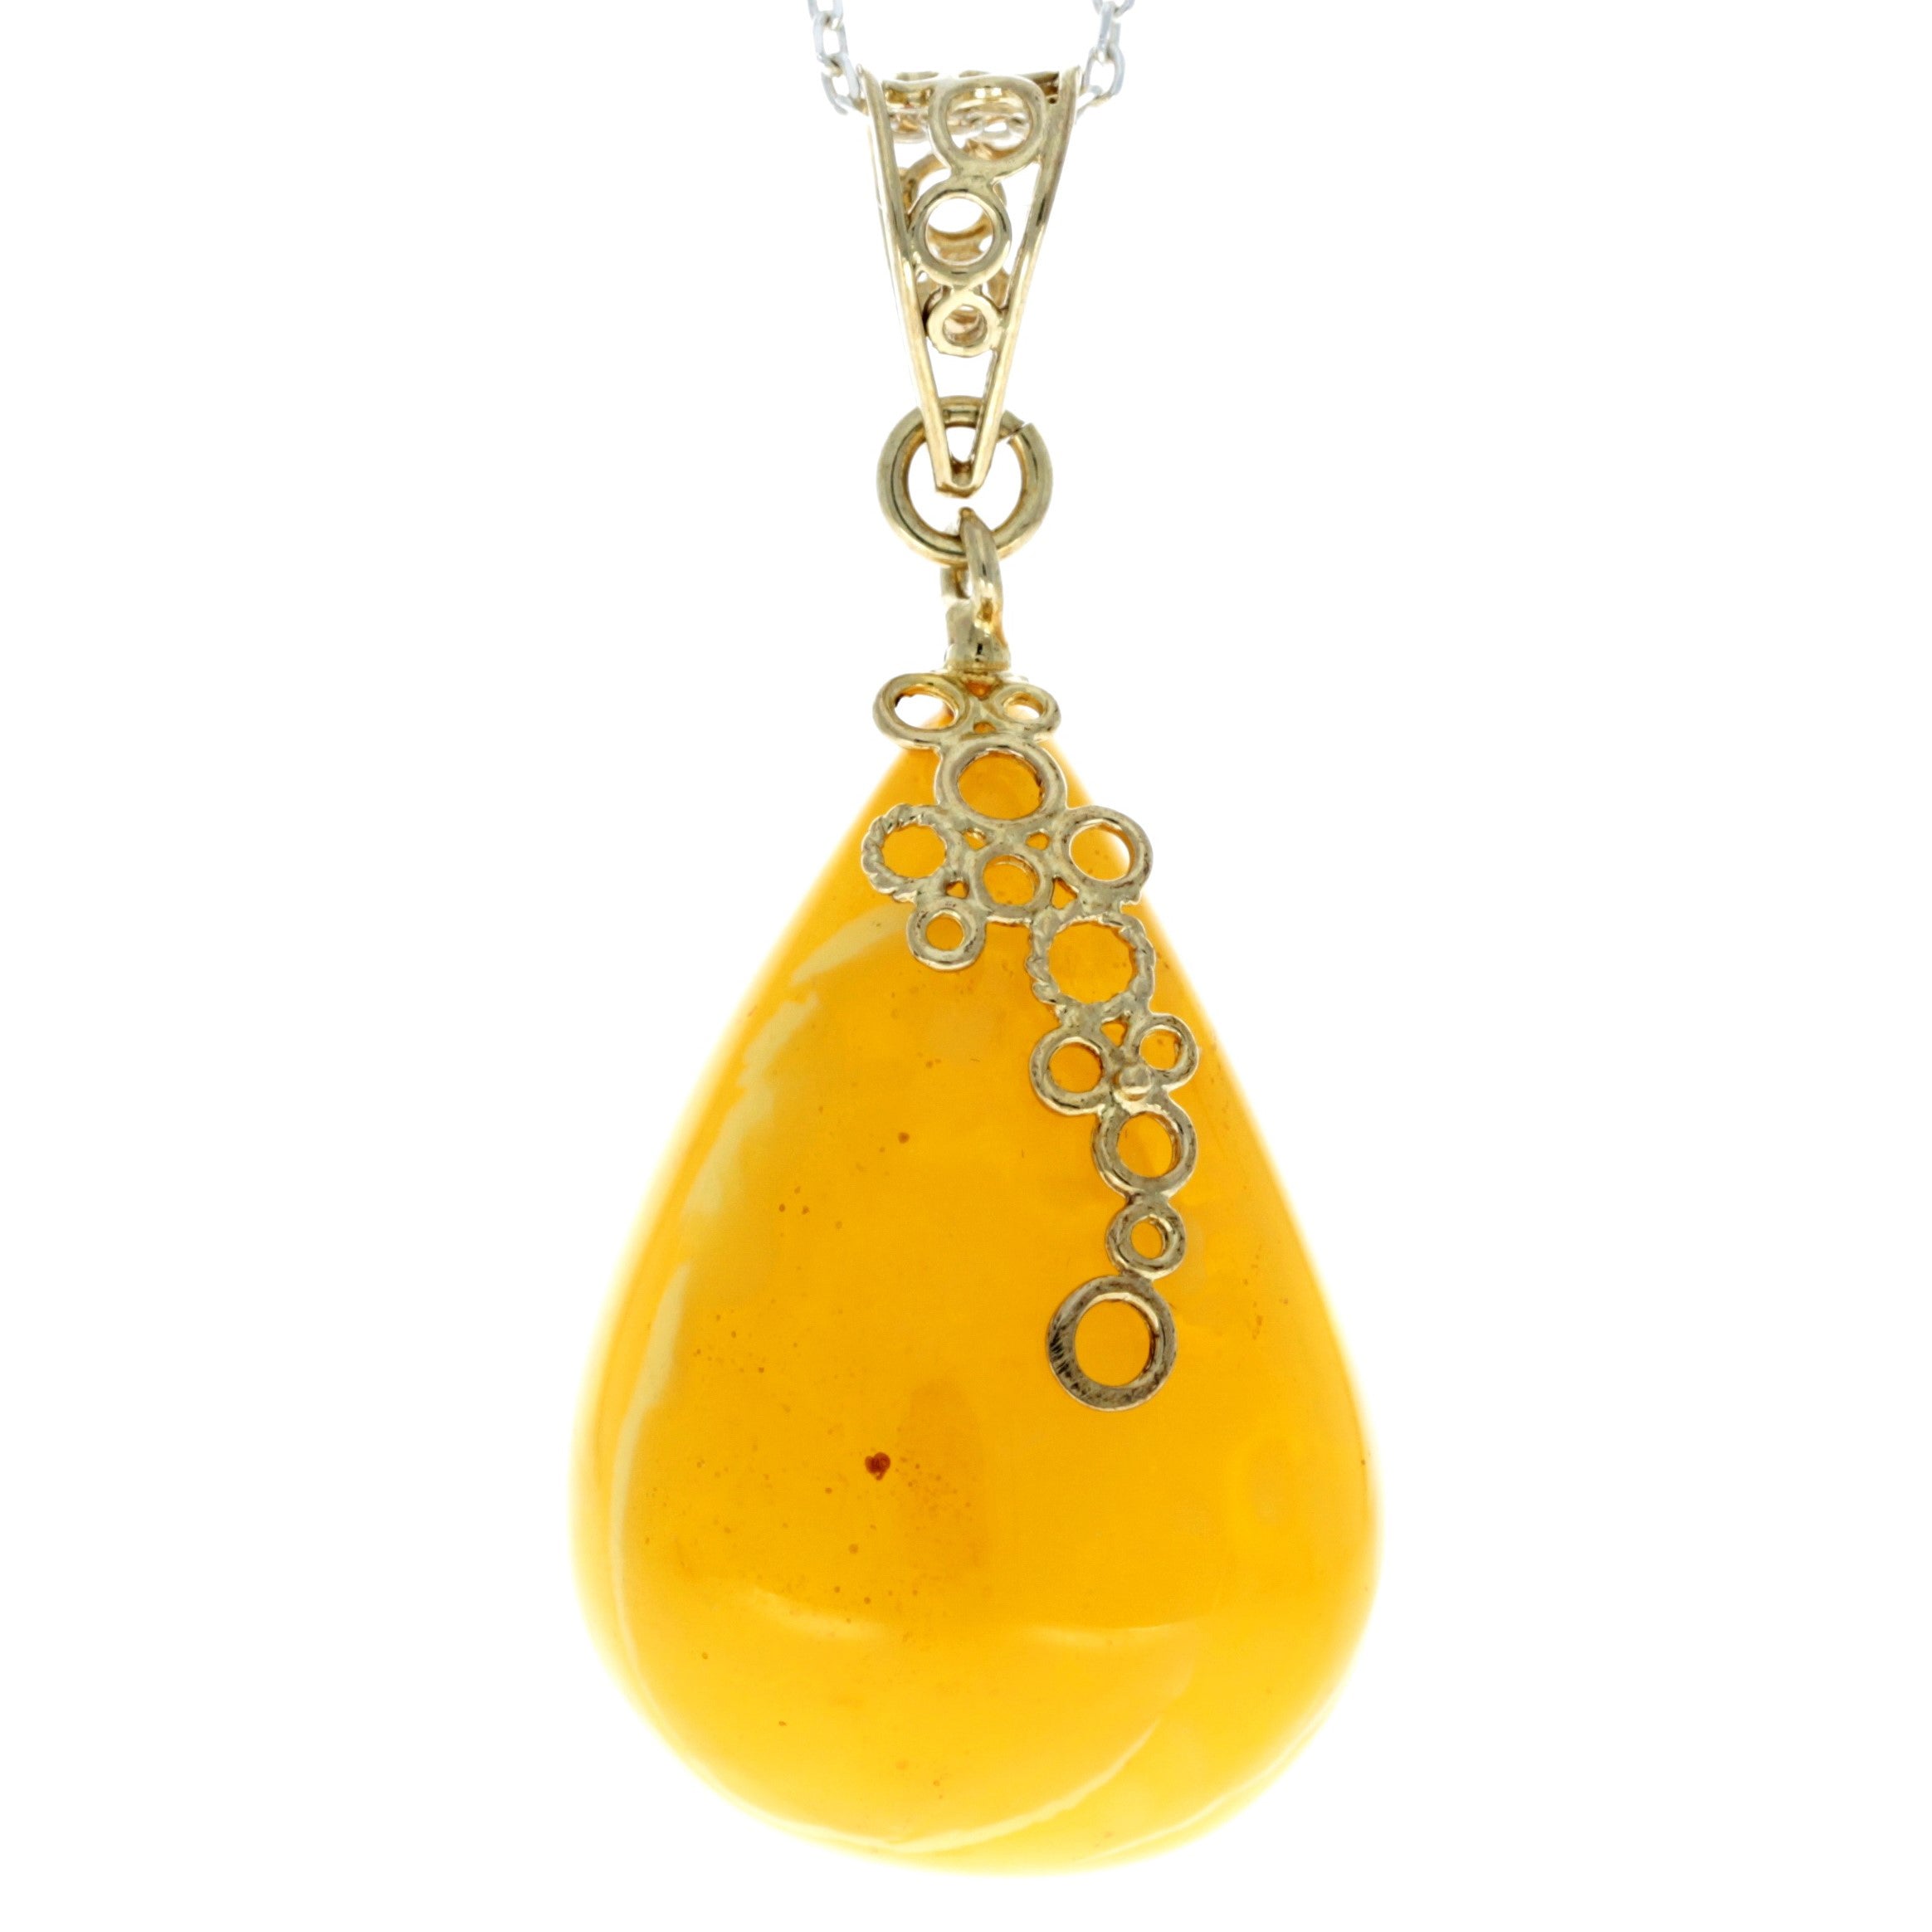 925 Sterling Silver Gold Plated with 14 ct Gold & Genuine Lemon Baltic Amber Exclusive Unique Pendant - GPD002